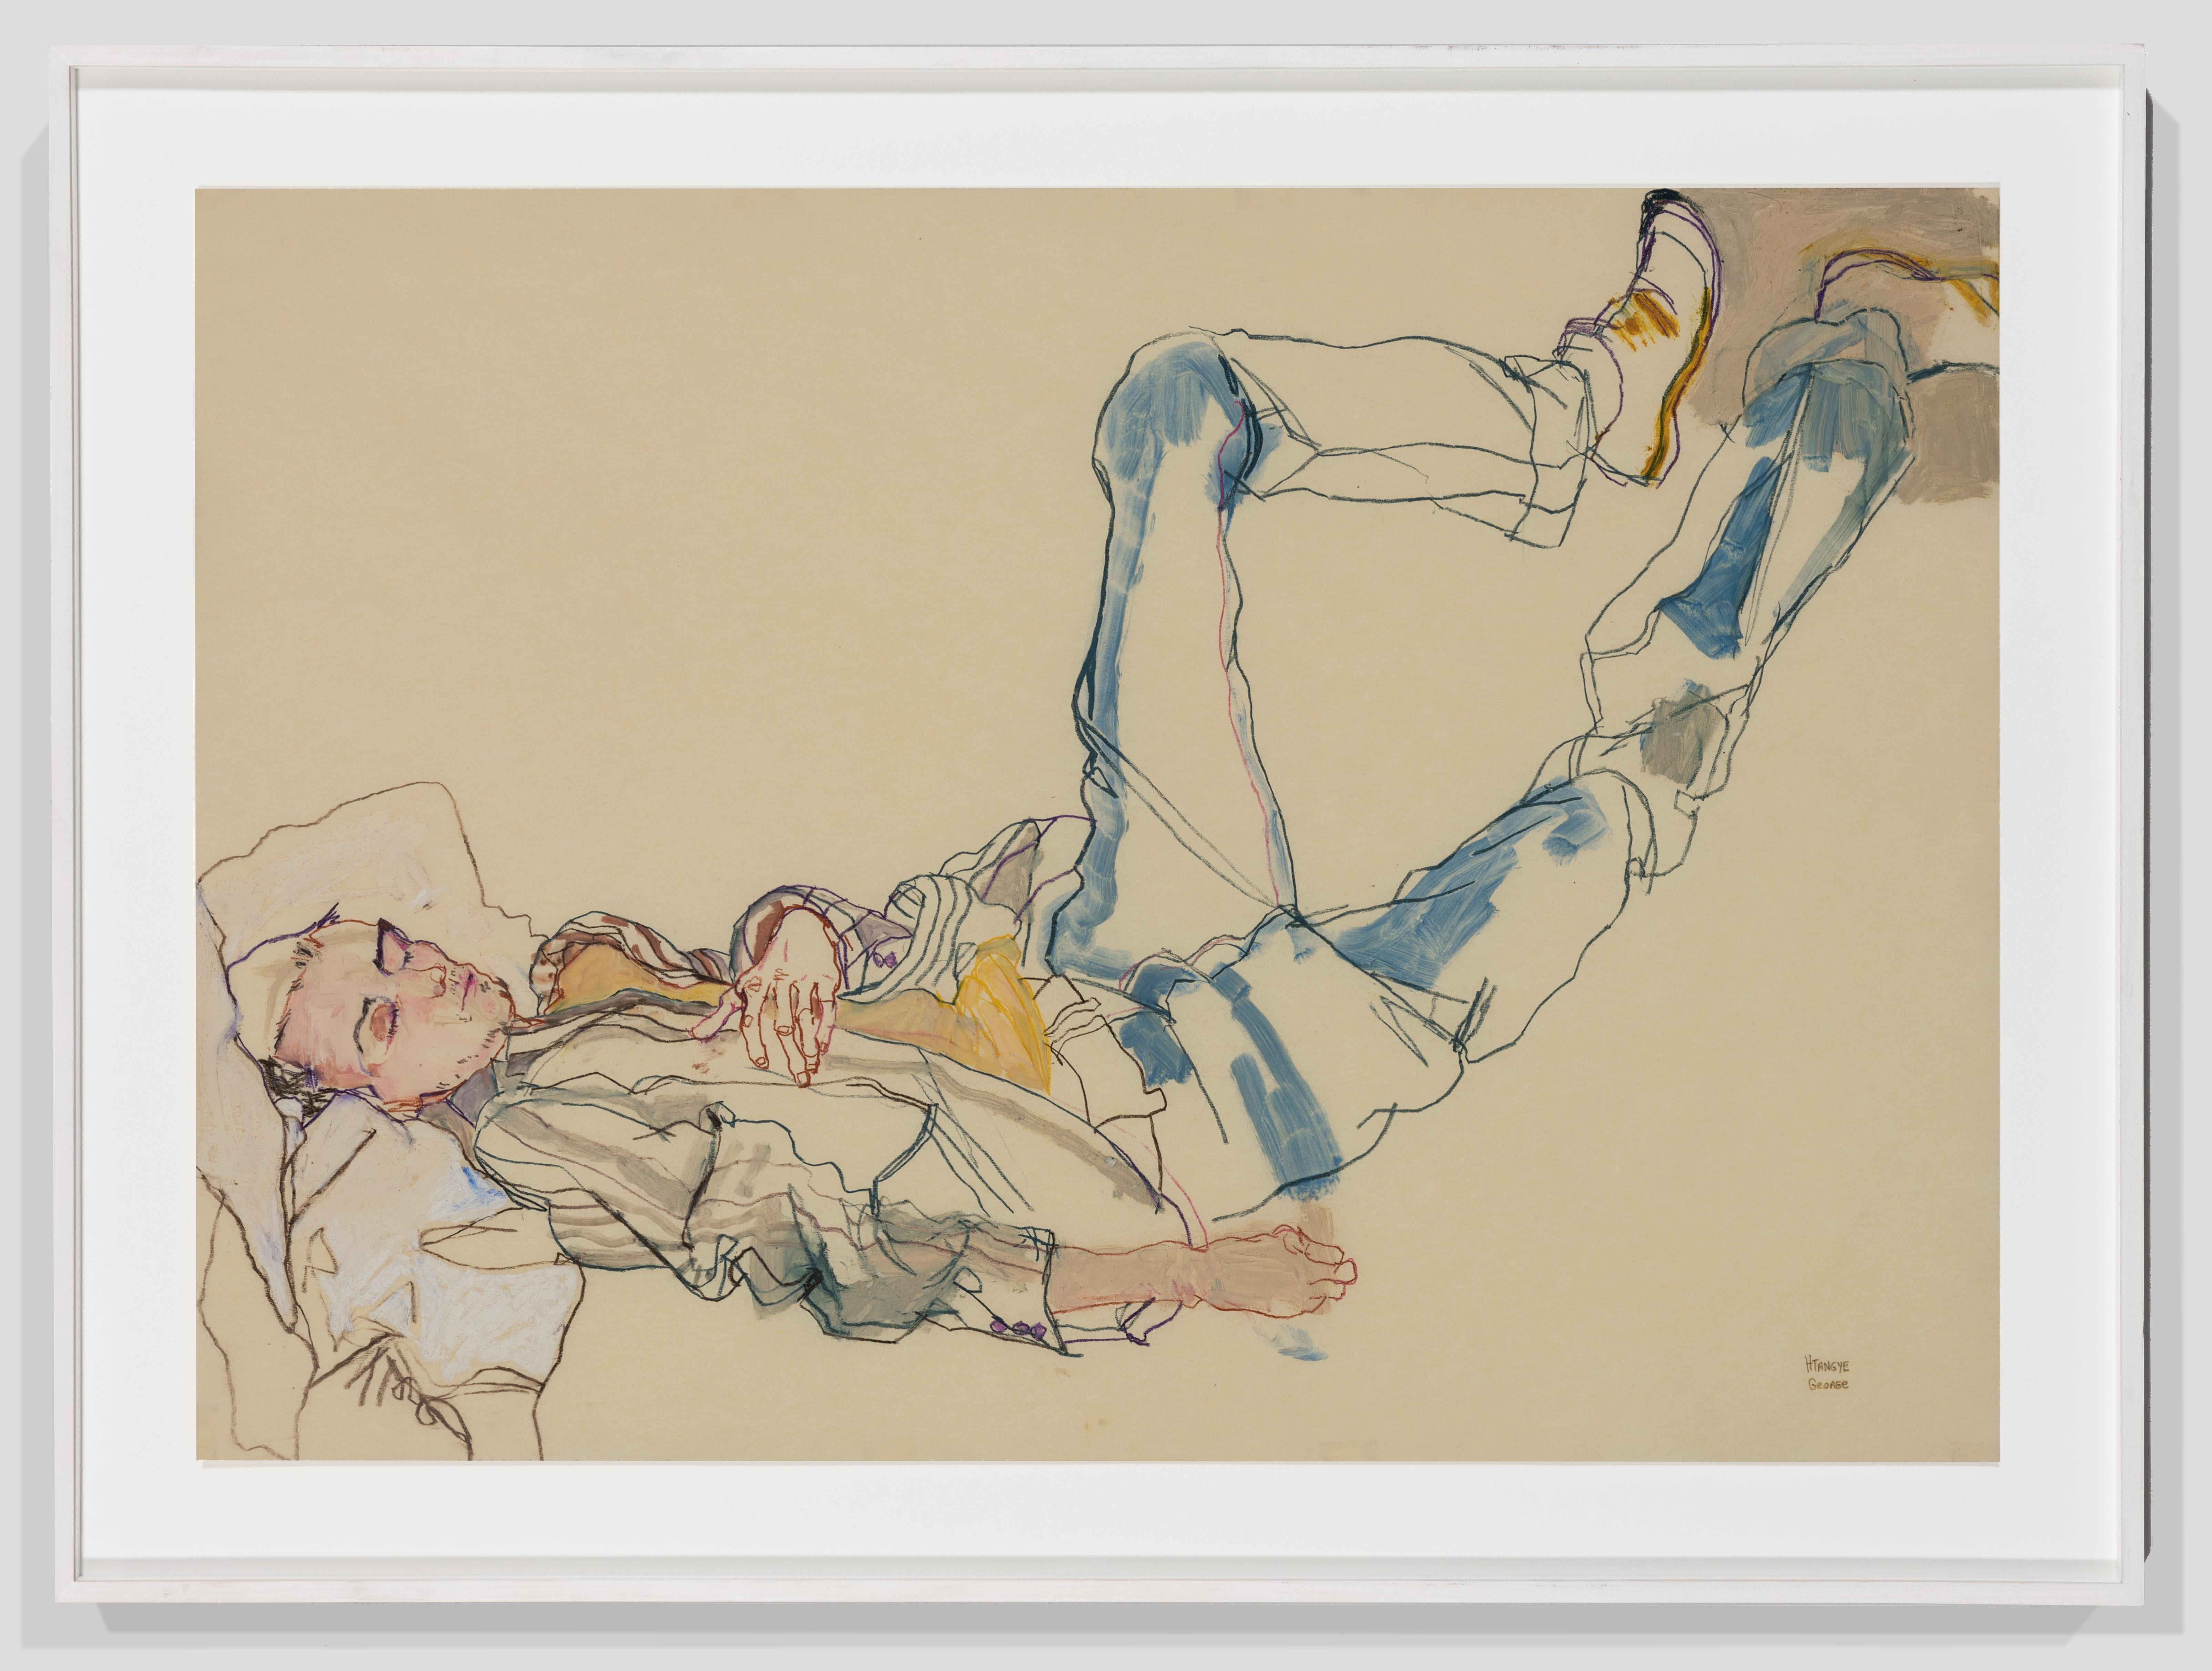 George (Sleeping, Feet up), Mixed media on Pergamenata parchment - Painting by Howard Tangye